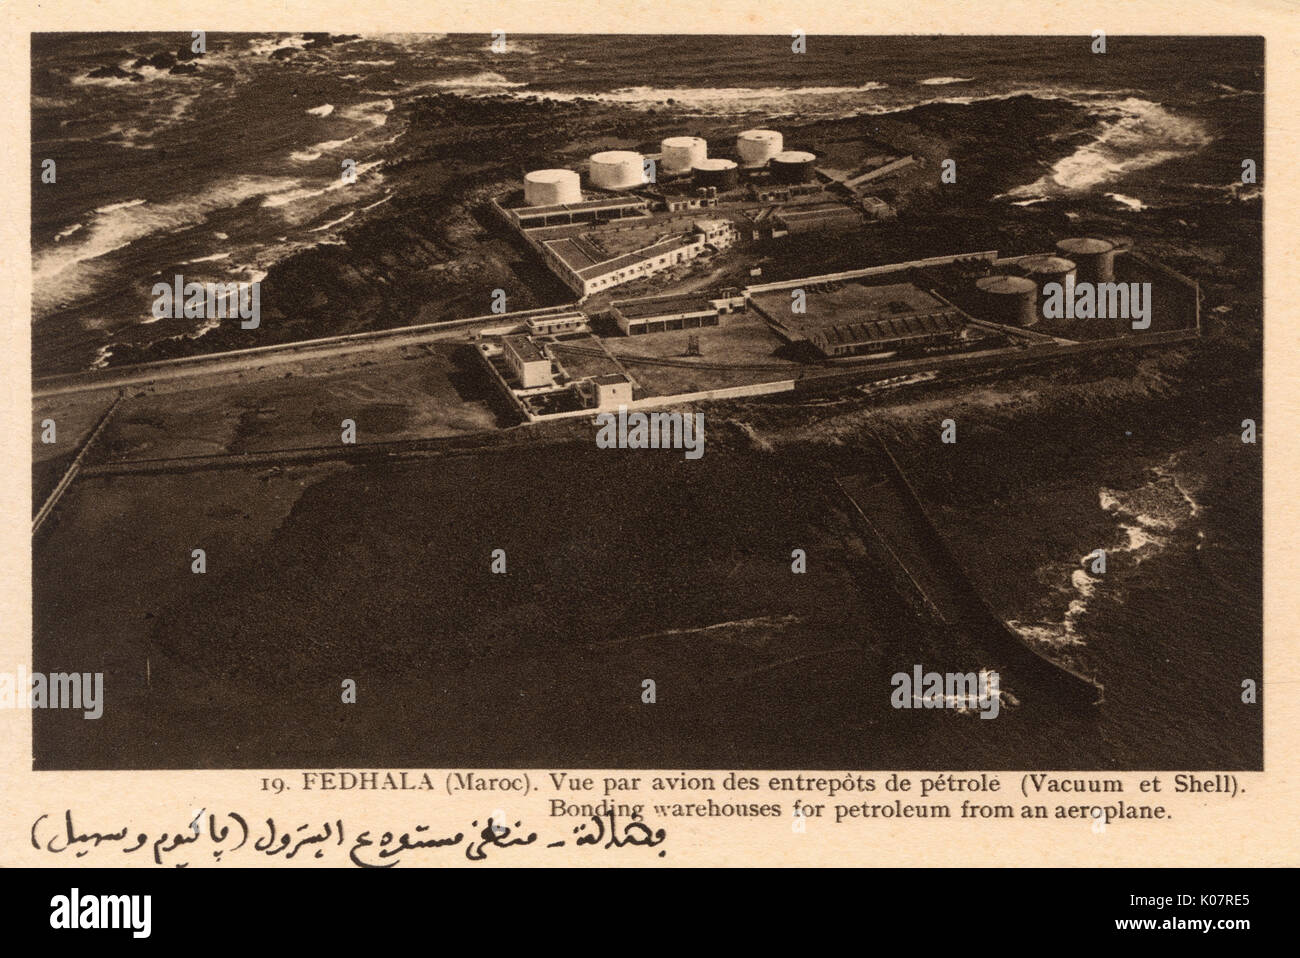 Aerial view of Fedala (Fedhala, now Mohammedia), Morocco, centre of the Moroccan oil industry, showing Vacuum and Shell bonding warehouses and petroleum storage tanks.     Date: circa 1930 Stock Photo